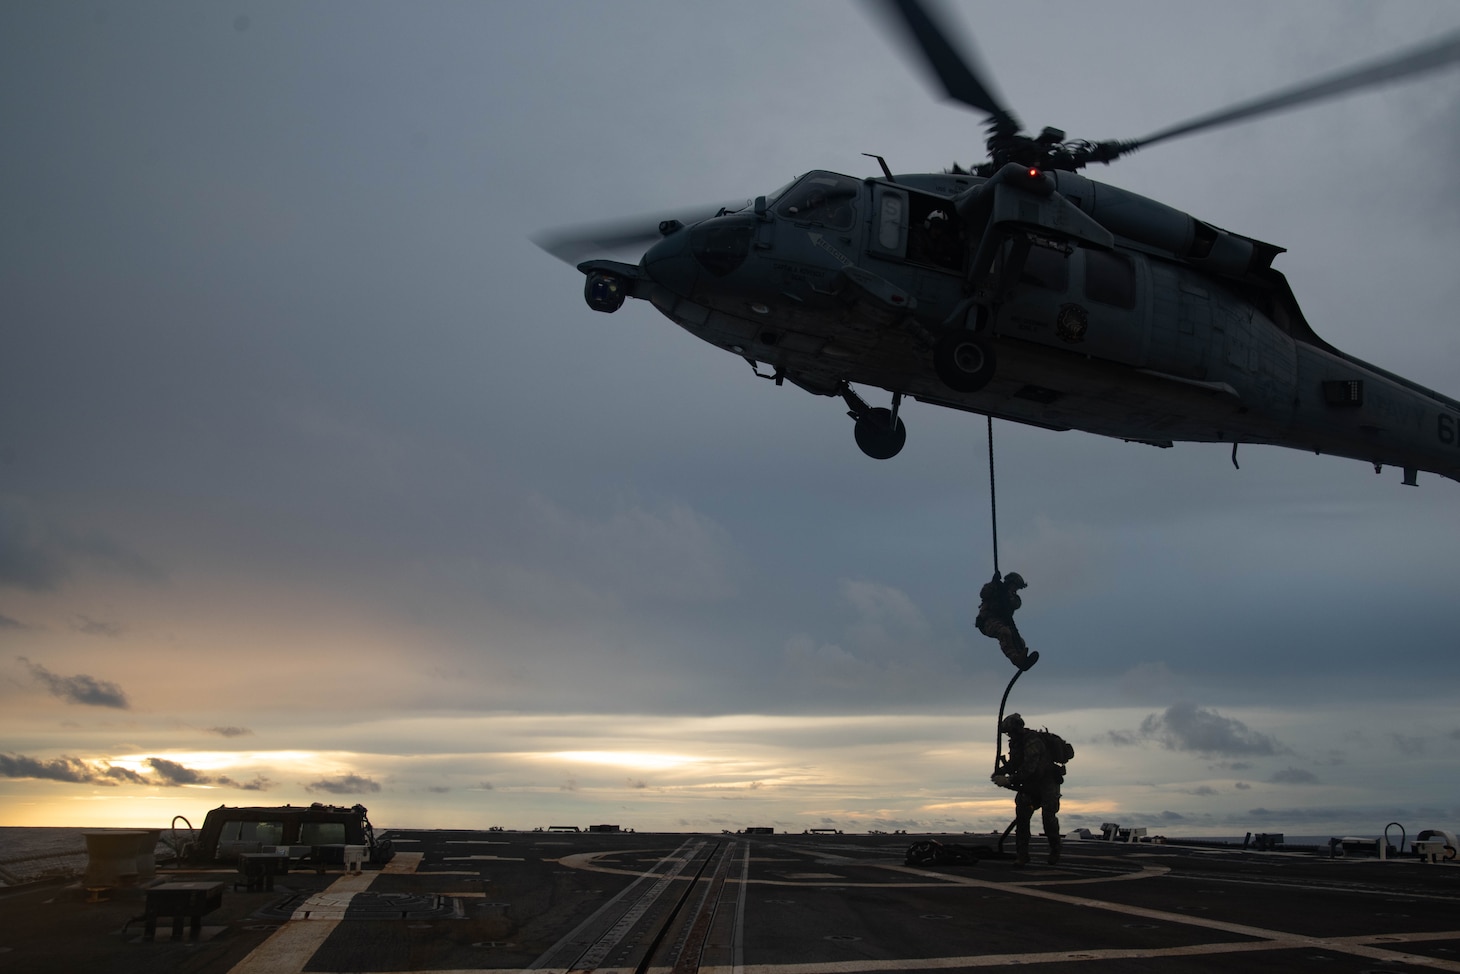 190625-N-RF825-1397 SOUTH CHINA SEA — Sailors from Explosive Ordnance Disposal Mobile Unit 5 attached to Commander Task Force (CTF) 70 conduct Helicopter Vertical Board Search and Seizure (HVBSS) training operations aboard USS McCampbell (DDG 85). CTF 70 is forward-deployed to the U.S. Seventh Fleet area of operations in support of security and stability in the Indo-Pacific Region.